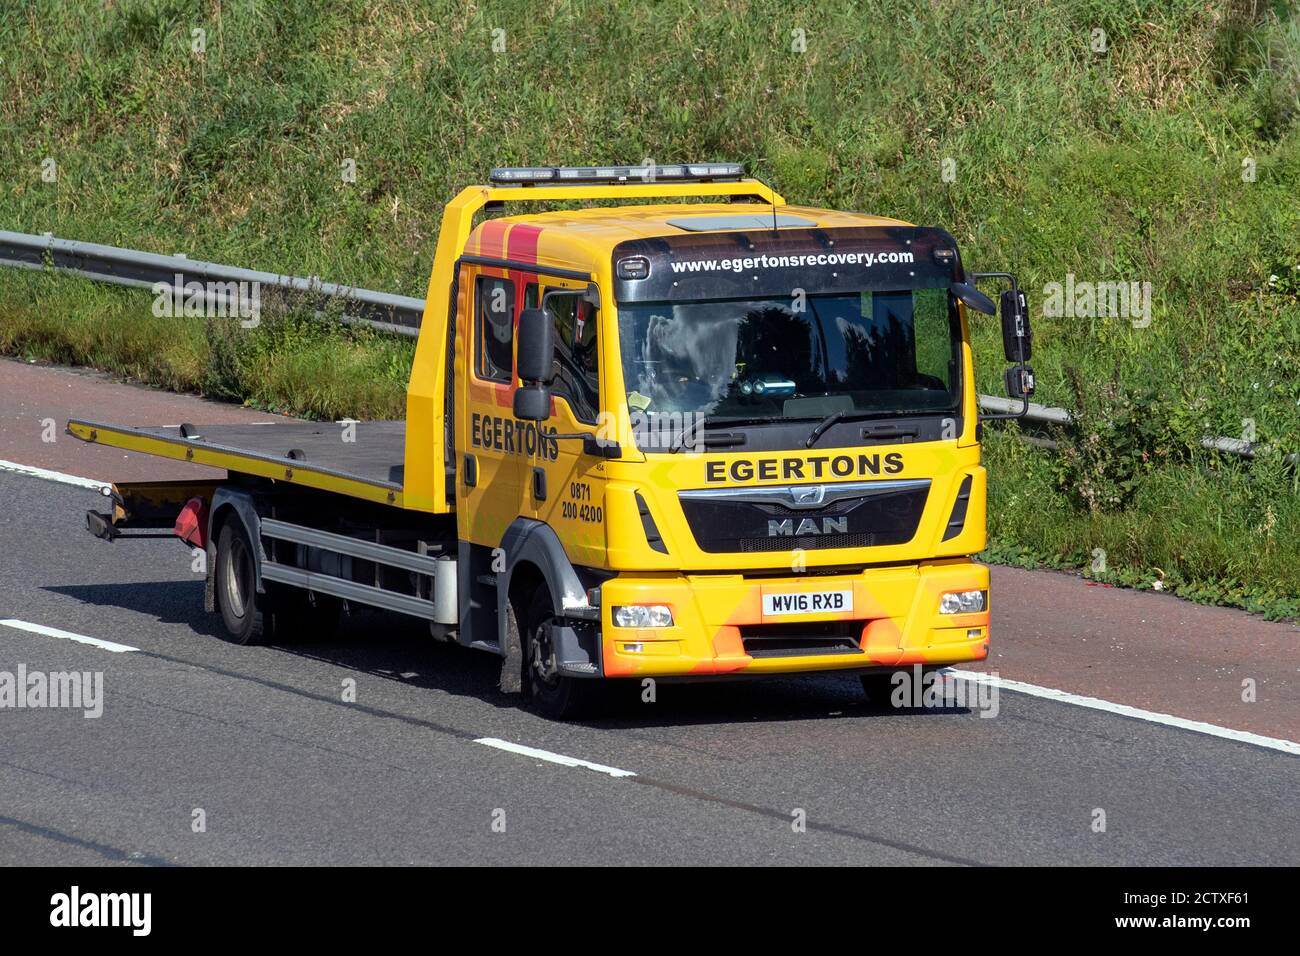 2016 yellow Man TGL Egertons Breakdon Recovery lorry;  Haulage delivery trucks, lorry, transportation, truck, MAN vehicle, delivery, commercial transport industry on the M6 at Lancaster, UK Stock Photo